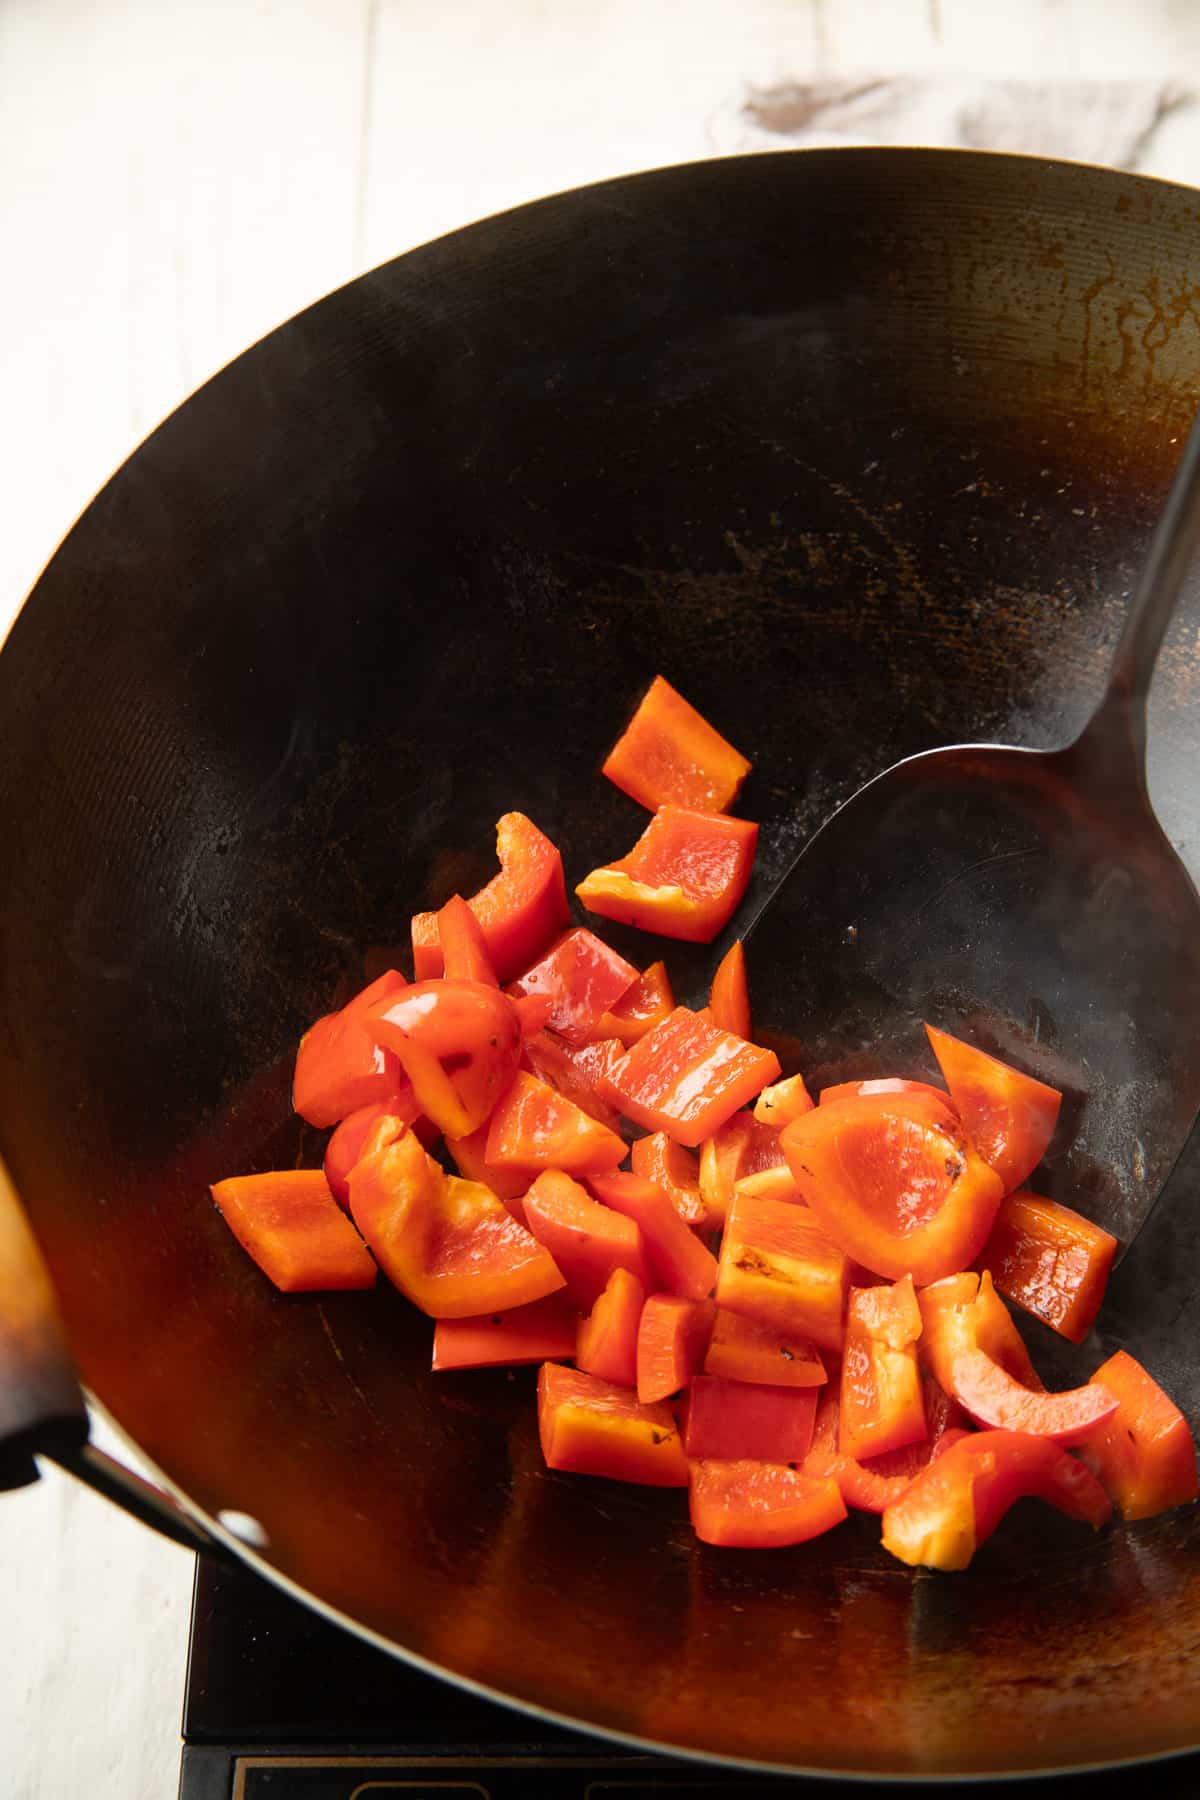 Red bell pepper pieces being stir fried in a wok.